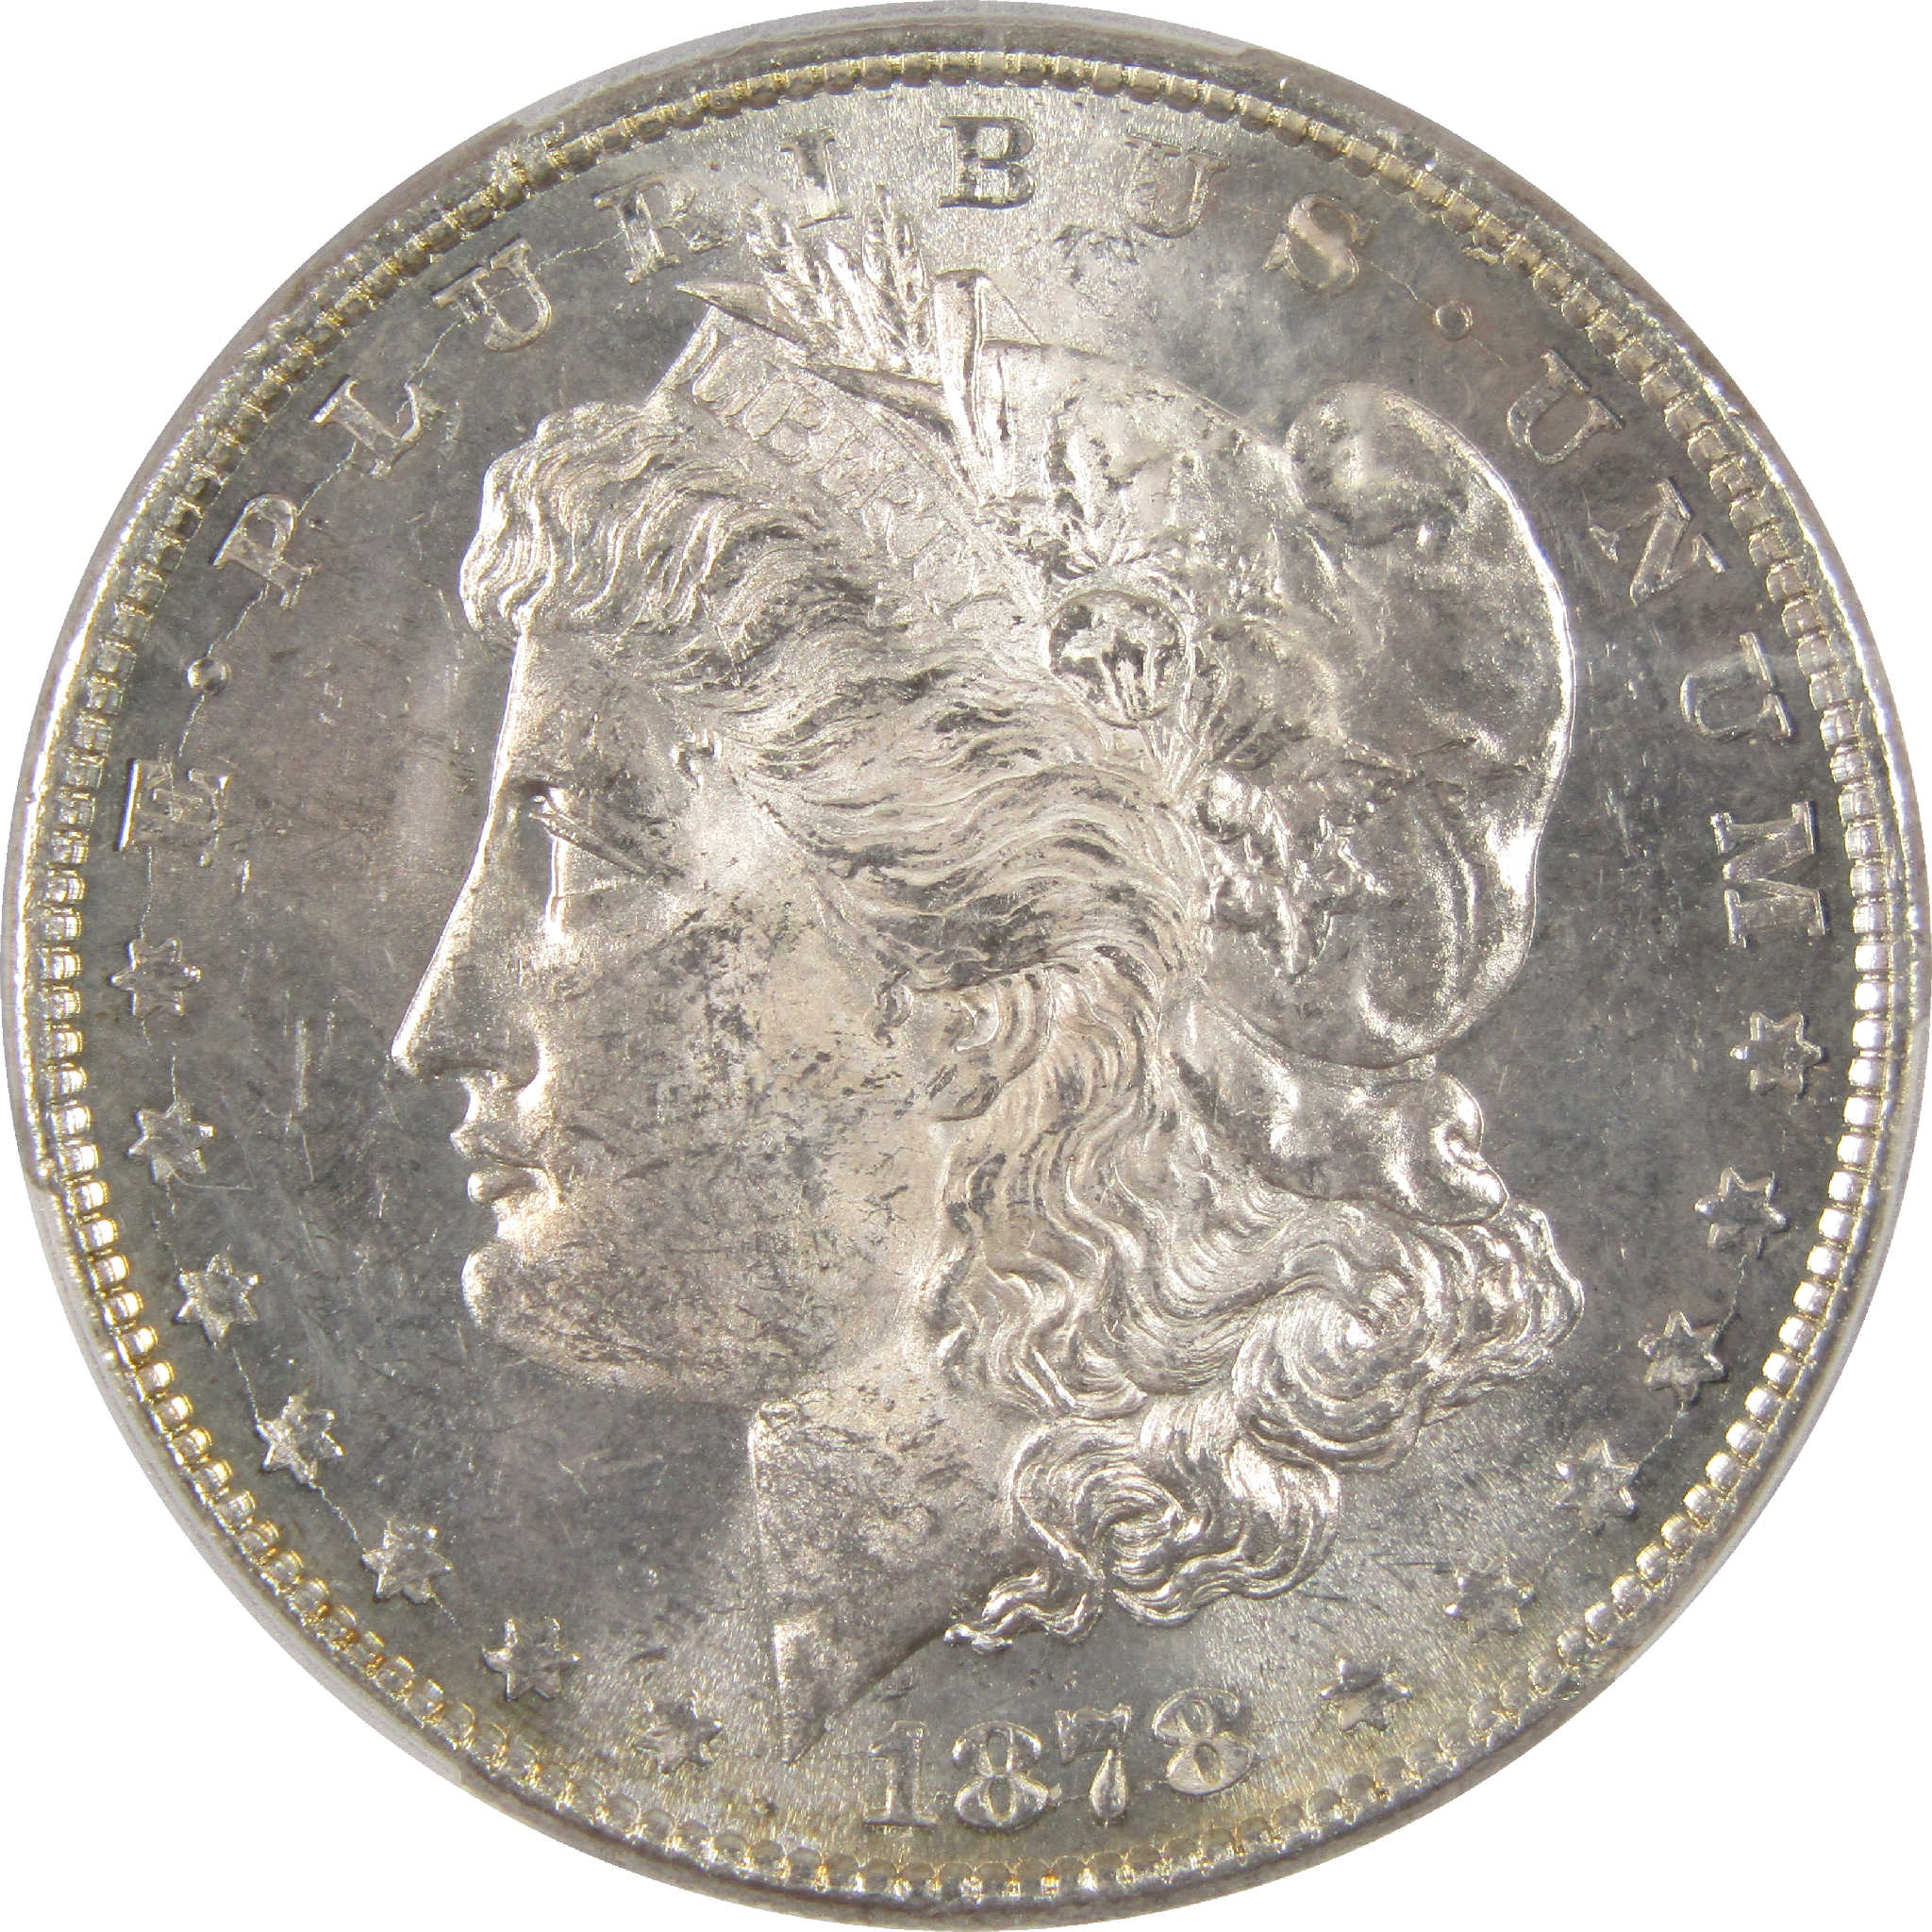 1878 8TF Morgan Dollar MS 63 PCGS Silver $1 Uncirculated SKU:I11320 - Morgan coin - Morgan silver dollar - Morgan silver dollar for sale - Profile Coins &amp; Collectibles